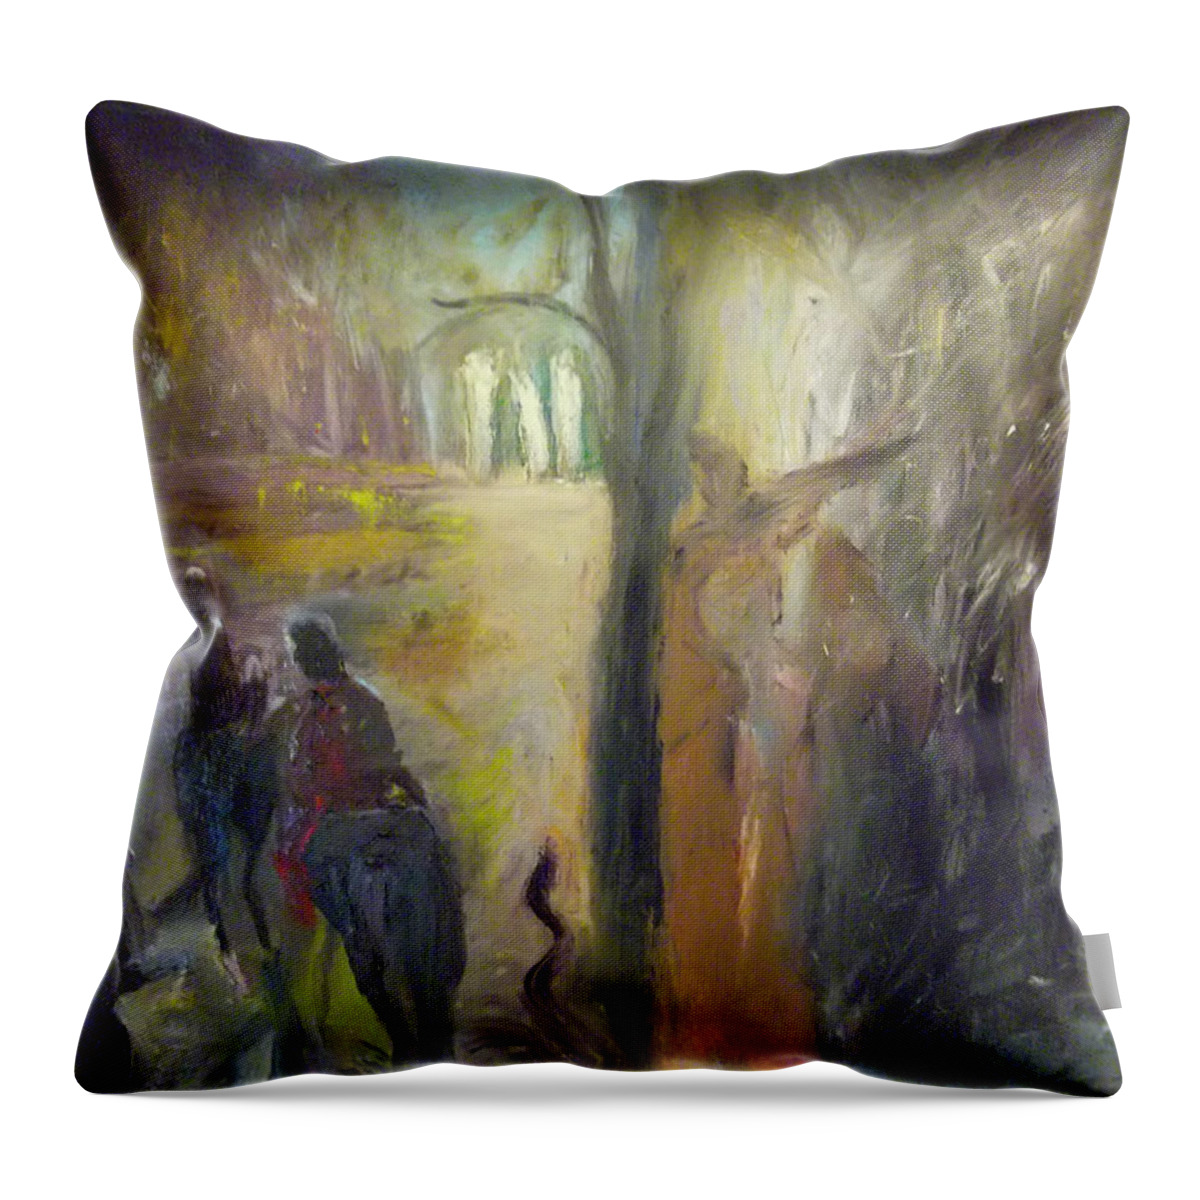 Abstract Throw Pillow featuring the painting The Myth by Susan Esbensen